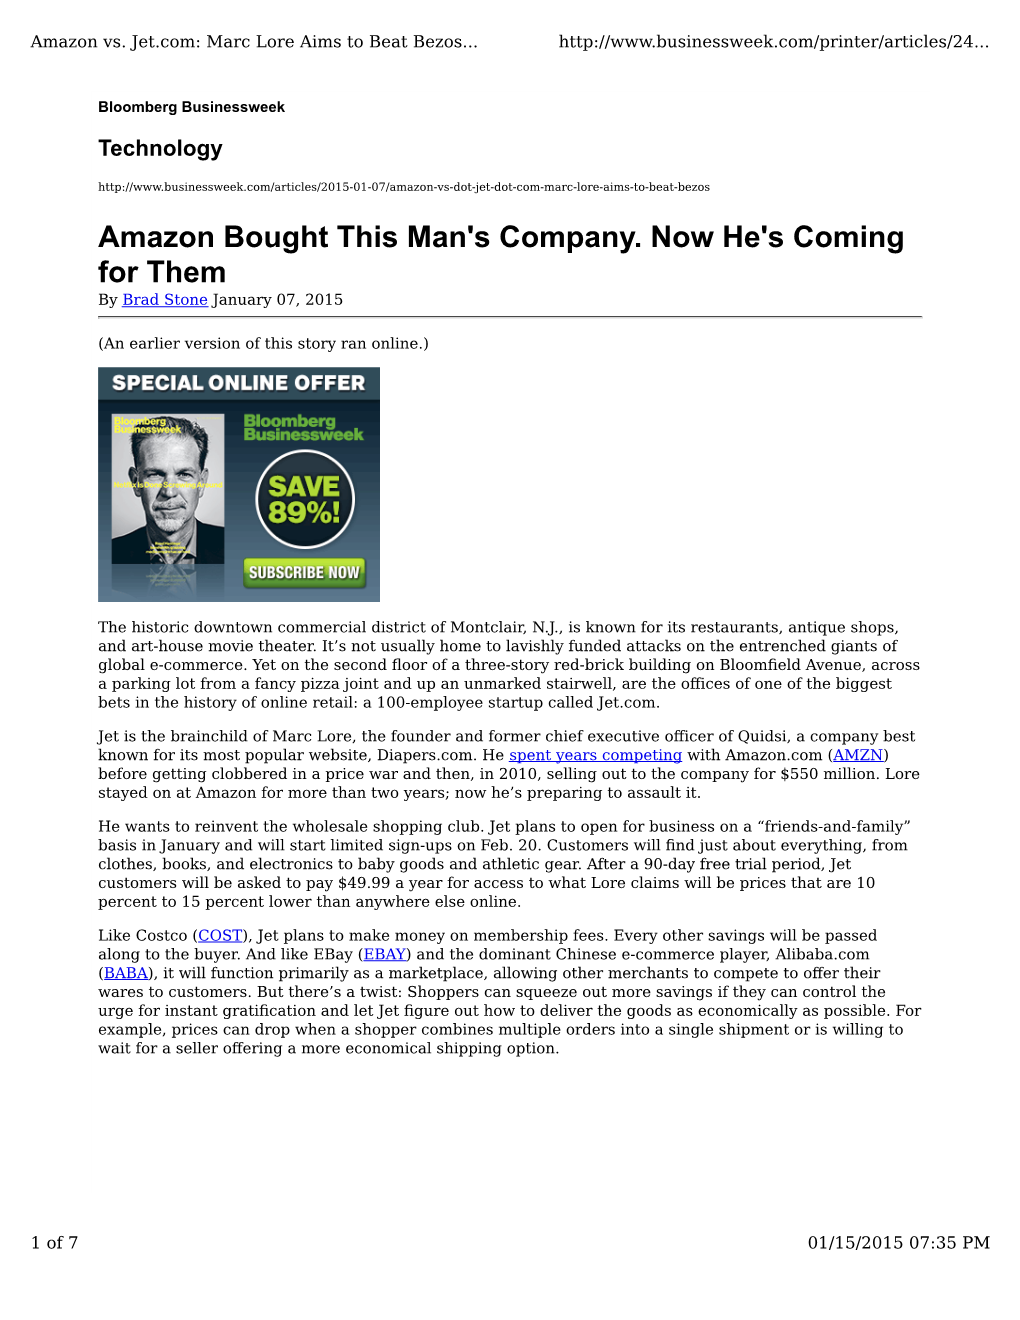 Amazon Bought This Man's Company. Now He's Coming for Them by Brad Stone January 07, 2015